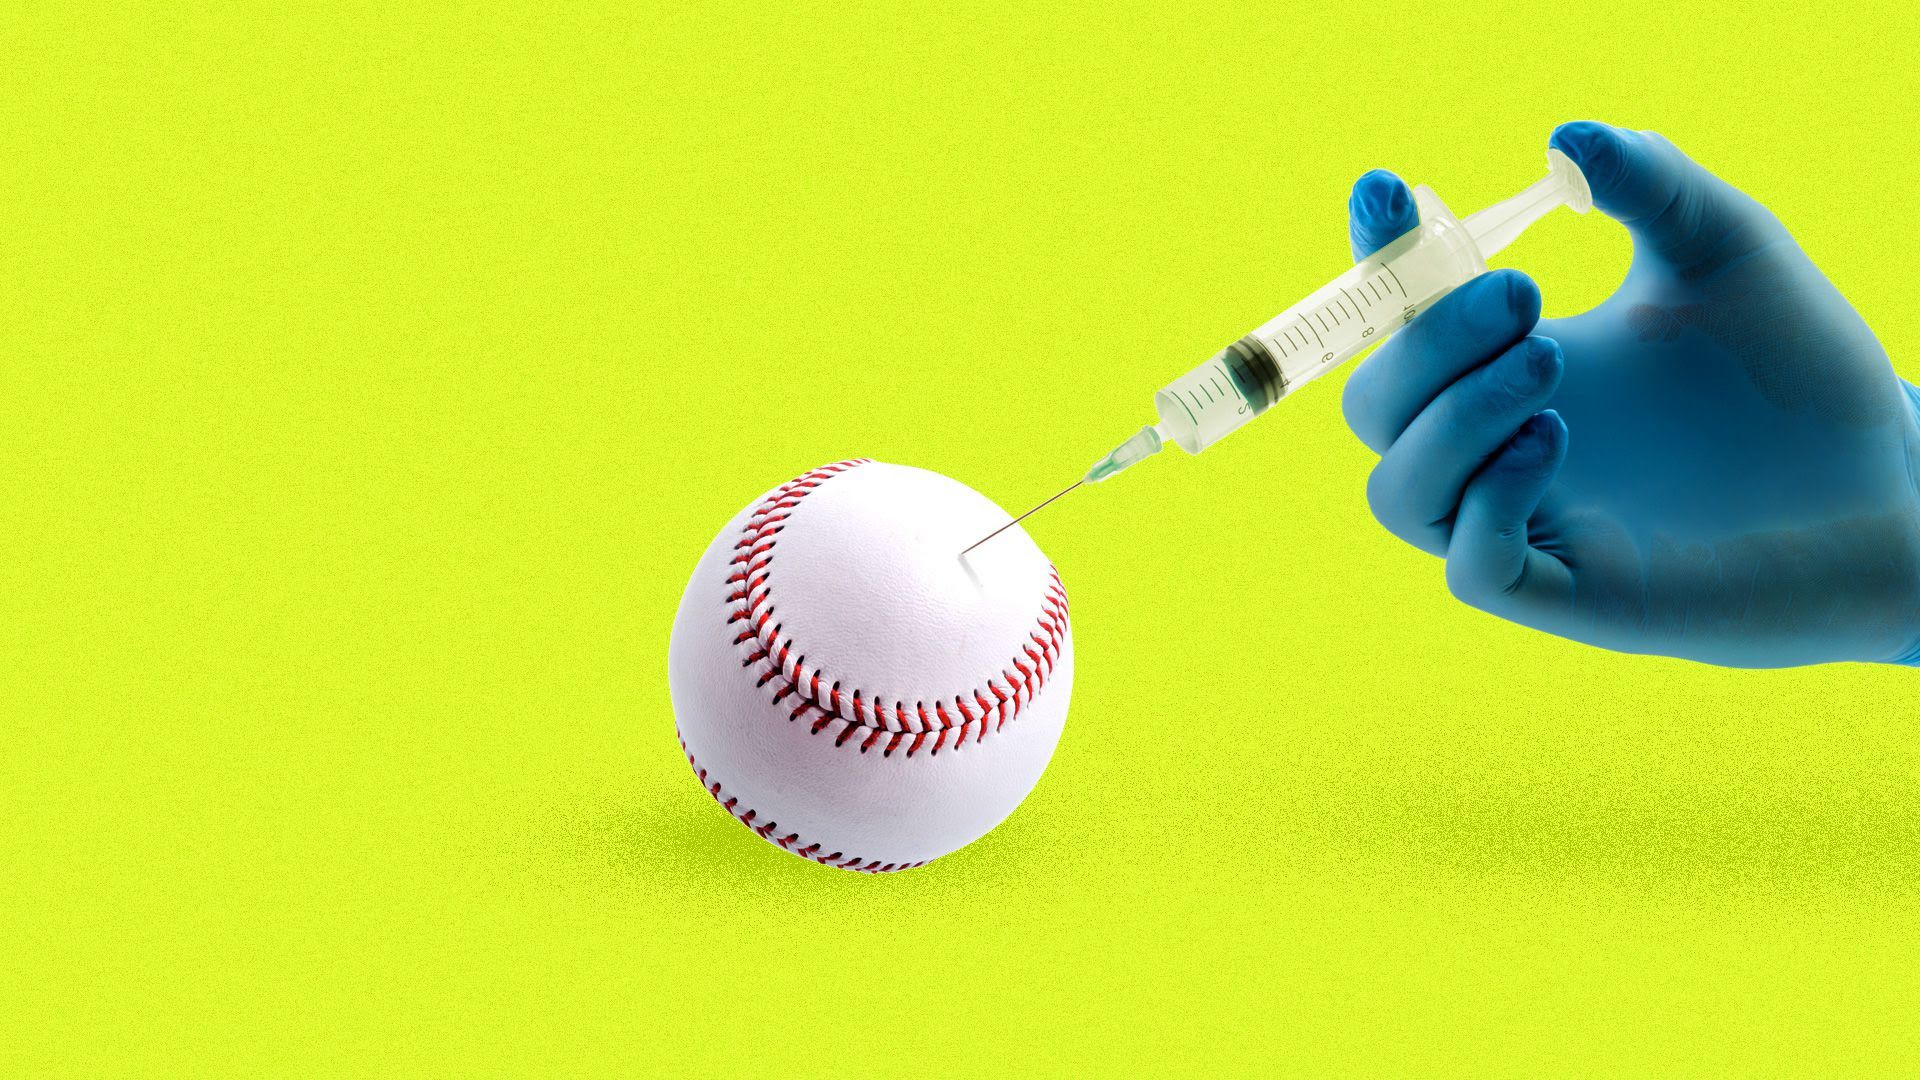 A baseball being injected with a serum